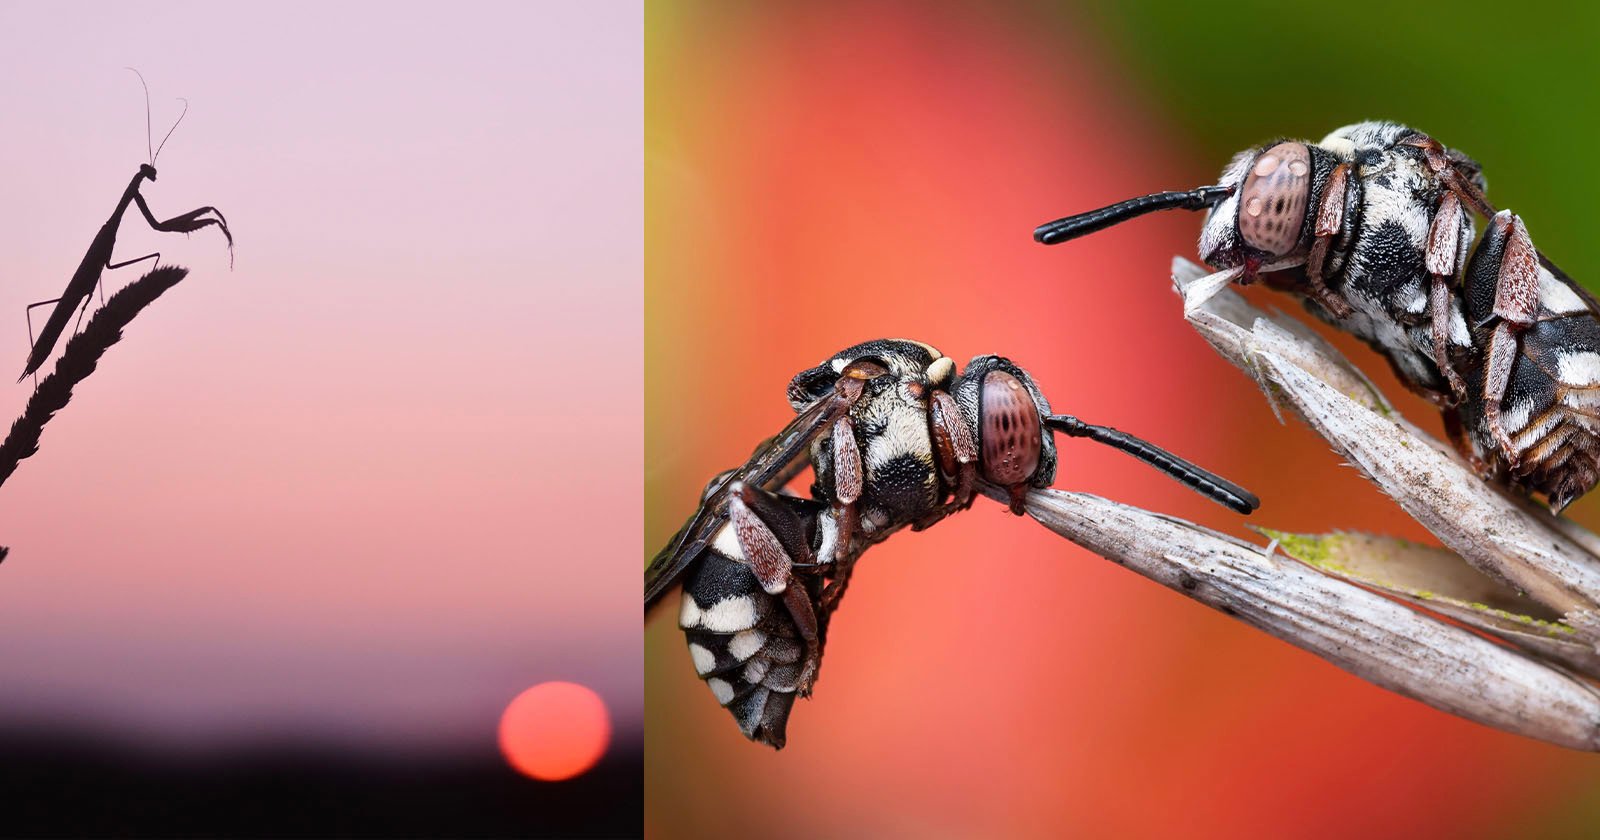 A split image. The left side shows a silhouette of a praying mantis on a leaf against a pinkish sunset sky. The right side features a close-up of two bees with striped patterns resting on thin branches against a blurred colorful background.